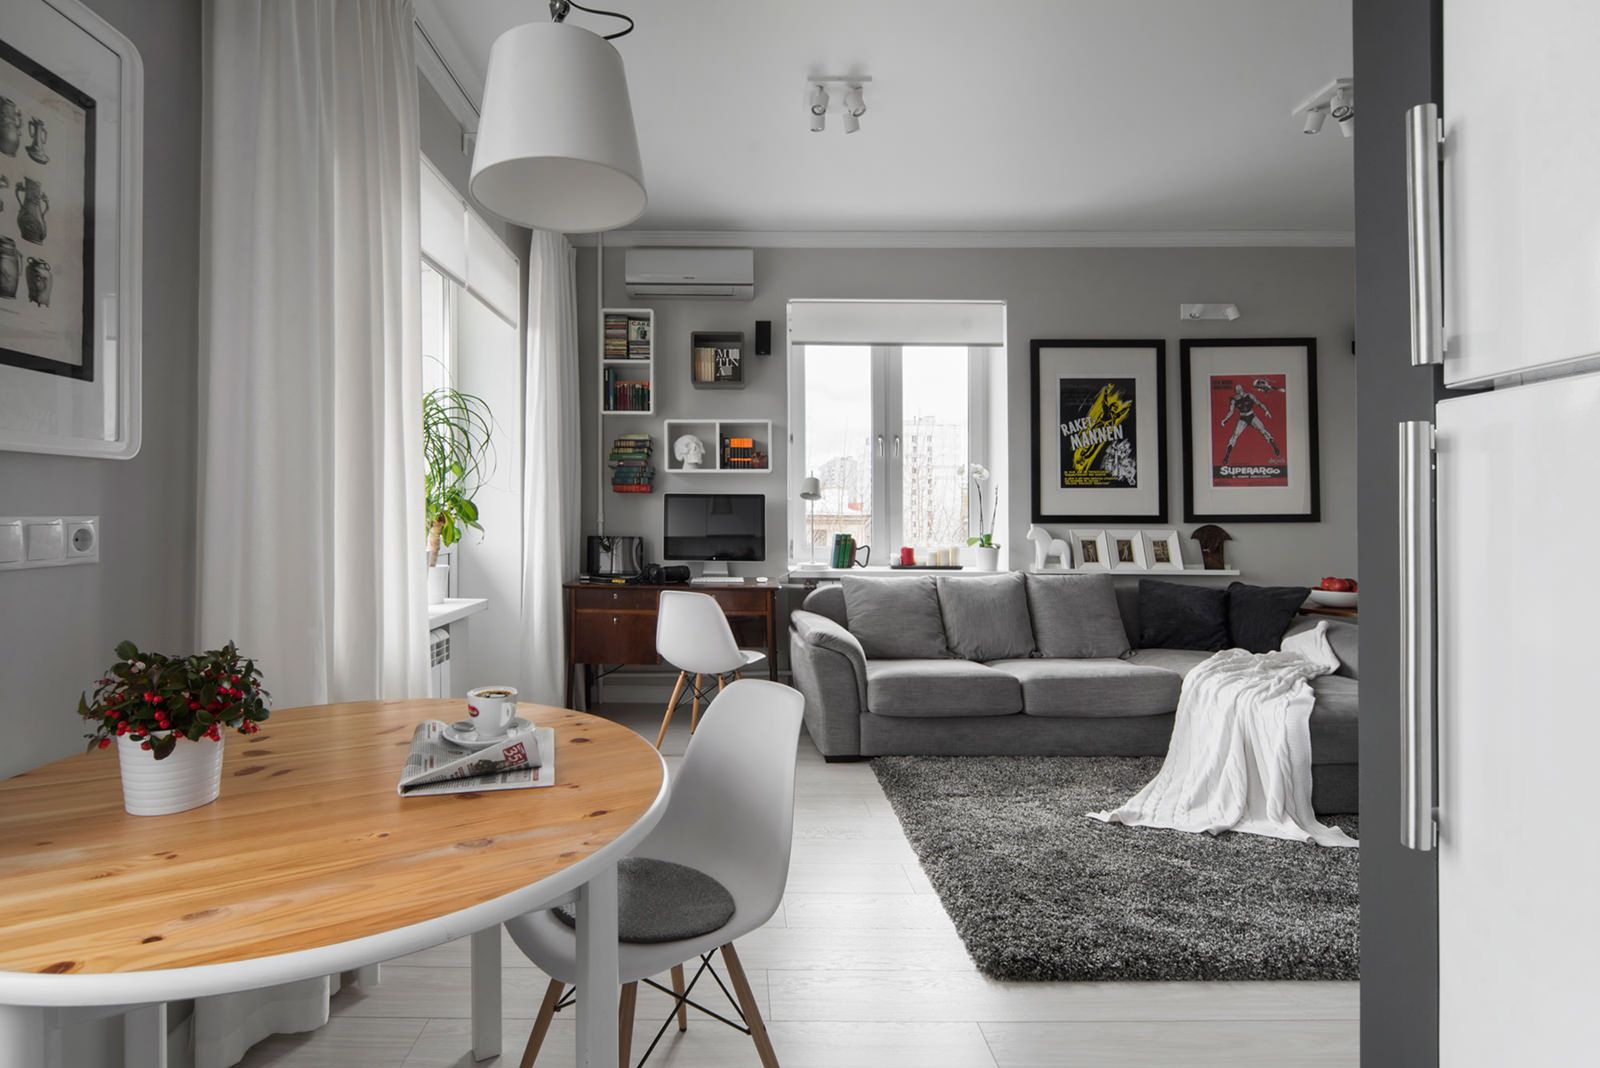 An example of a bright interior of a living room 25 sq.m